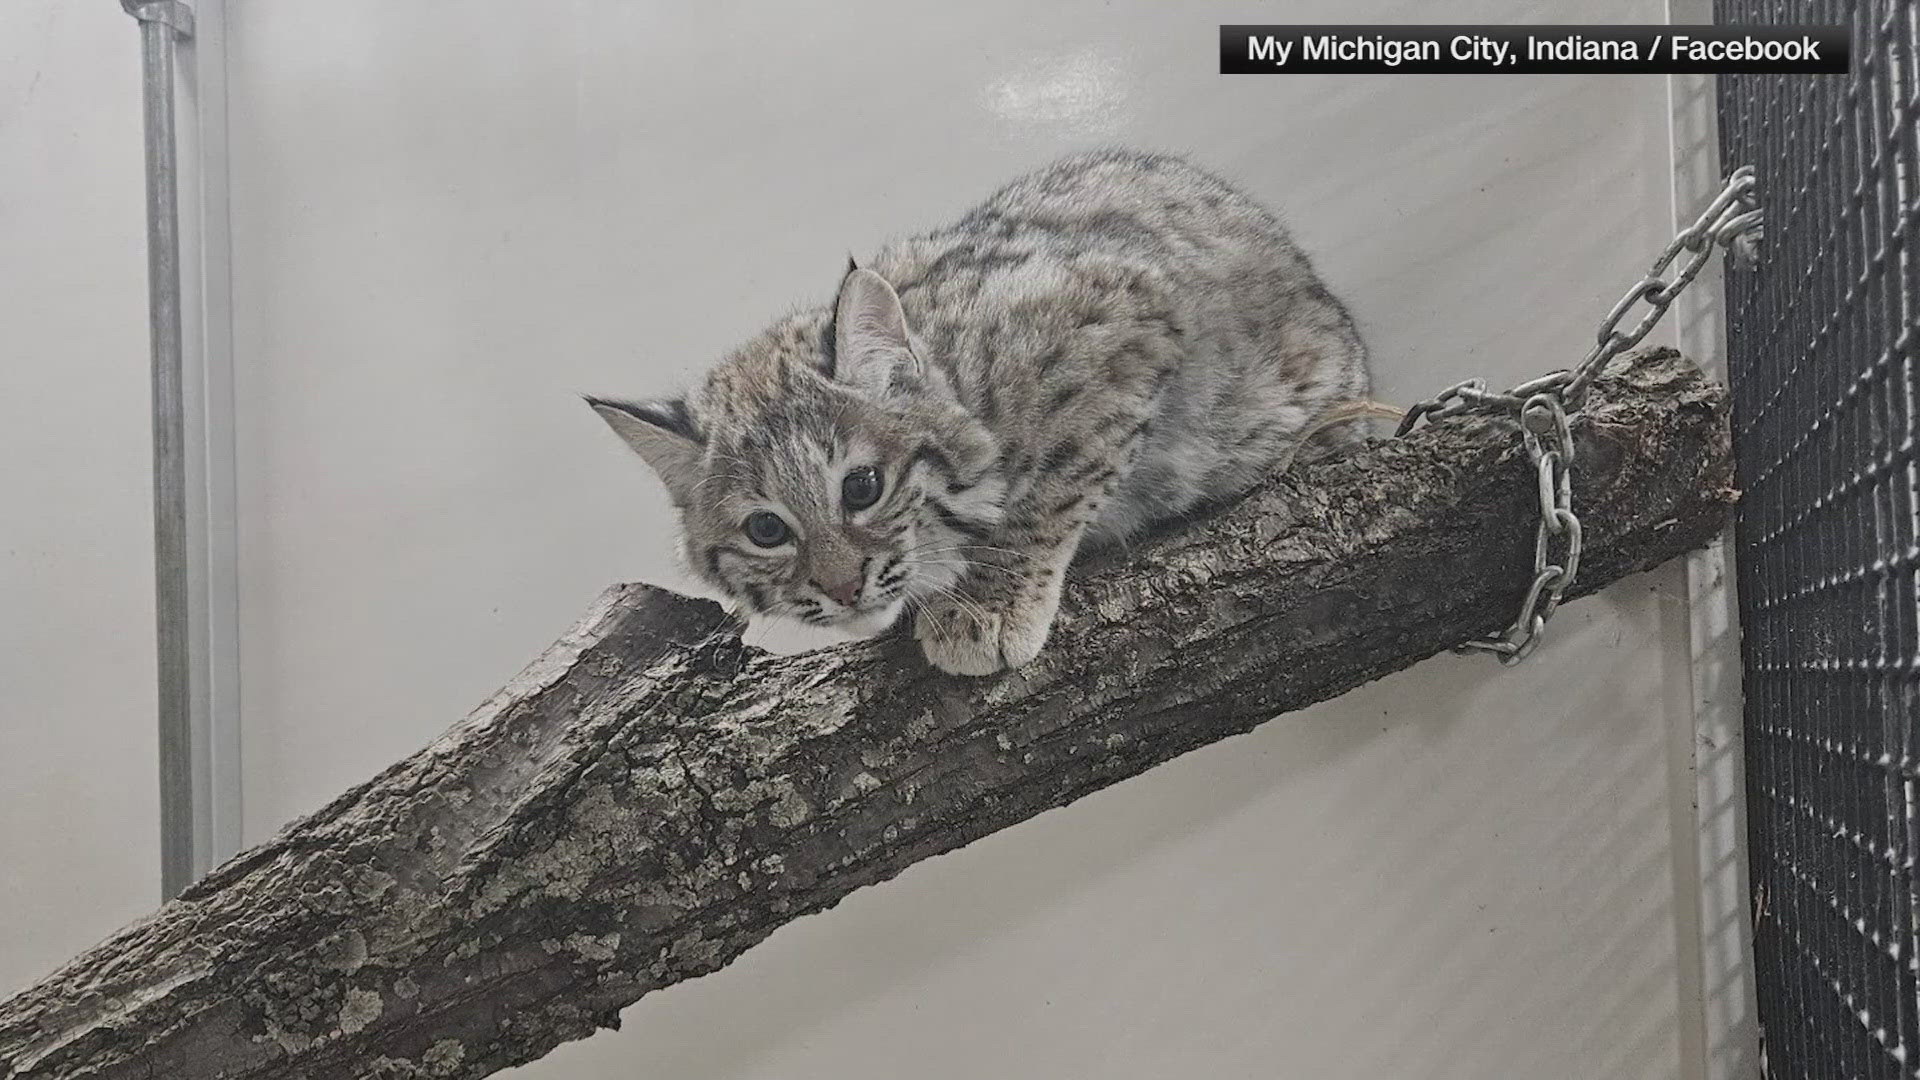 Zookeepers in Michigan City are on the lookout for "Grace," a baby bobcat that escaped her enclosure Wednesday morning.